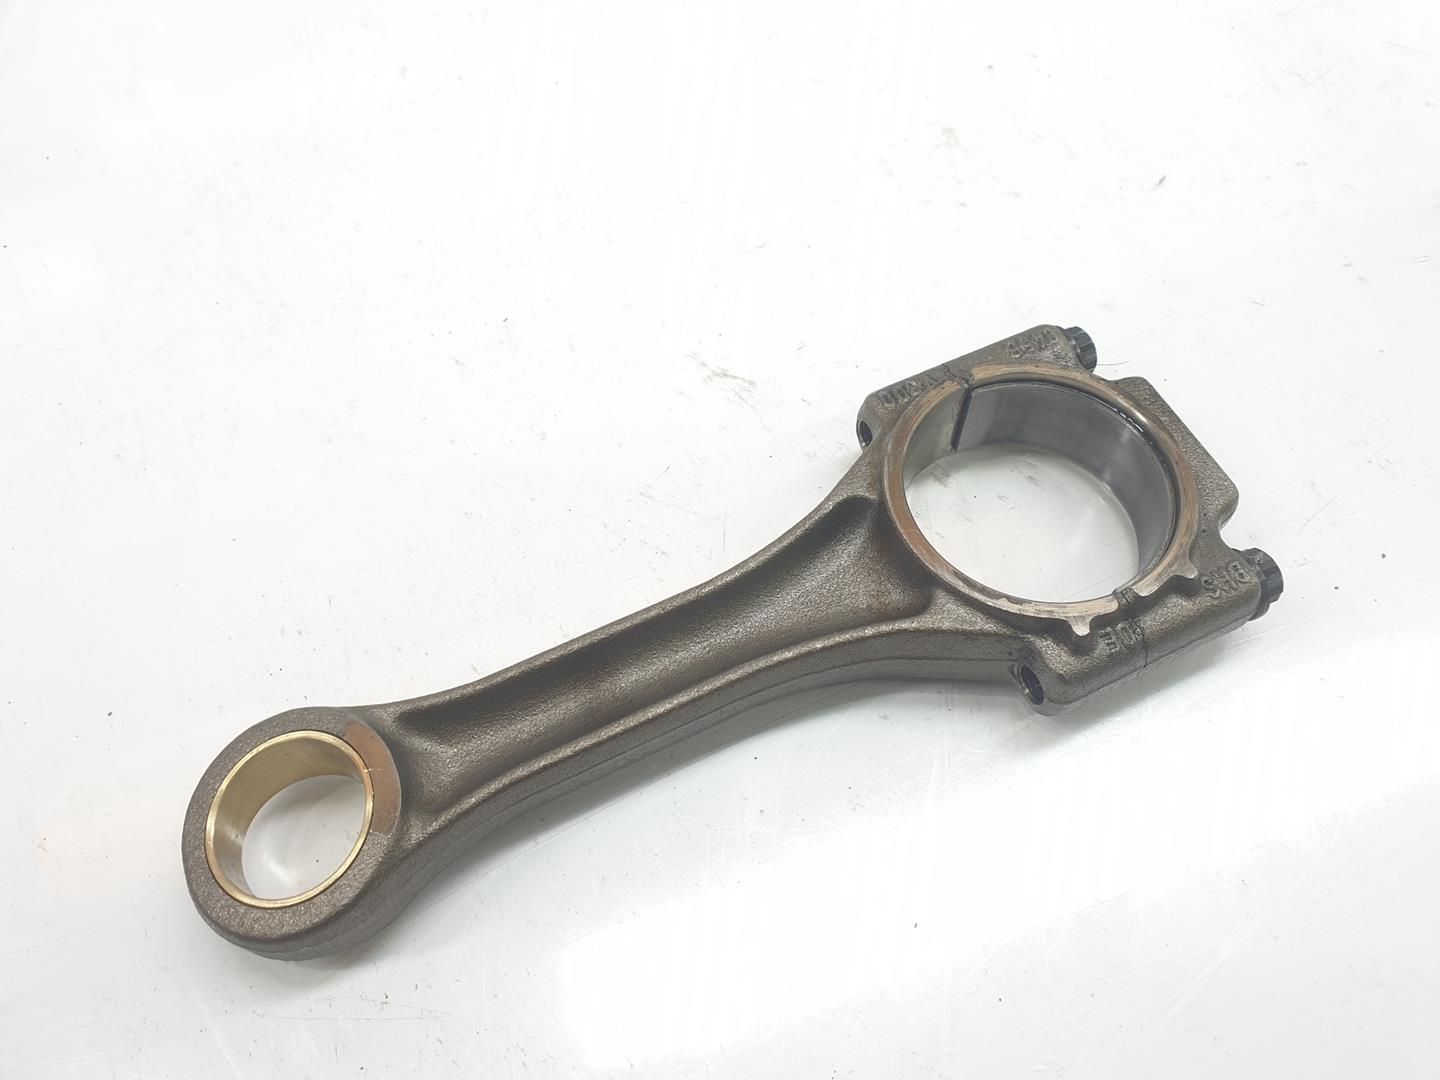 SEAT Ibiza 3 generation (2002-2008) Connecting Rod 045198401A, 045198401A, 1141CB 25100048